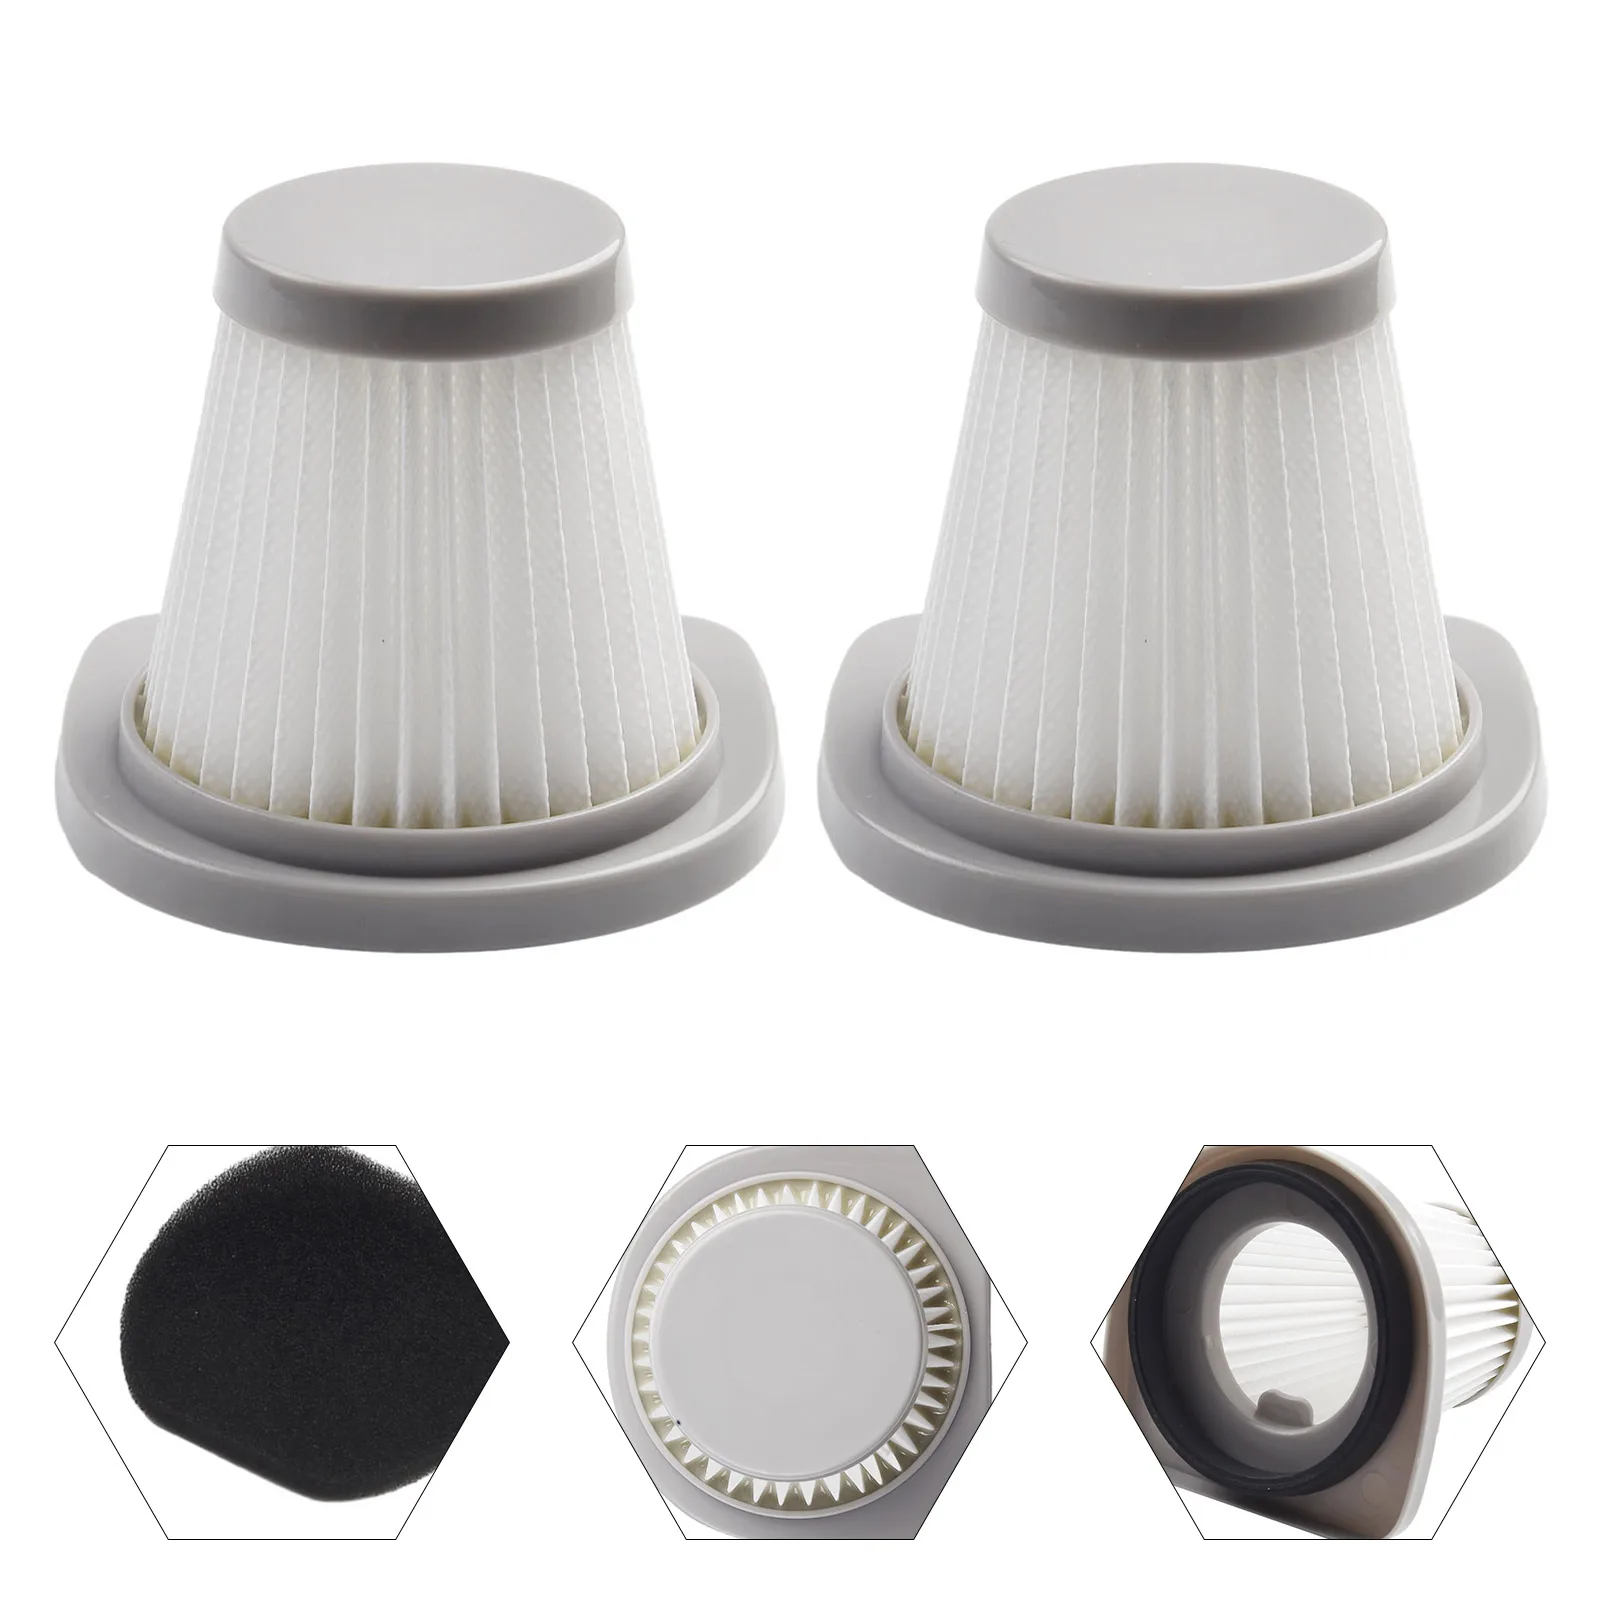 2Pcs Vacuum Cleaner Filter Replacement Bush Stick For Hoover VSC02B16T-30 Filter Vacuum Cleaner Accessories